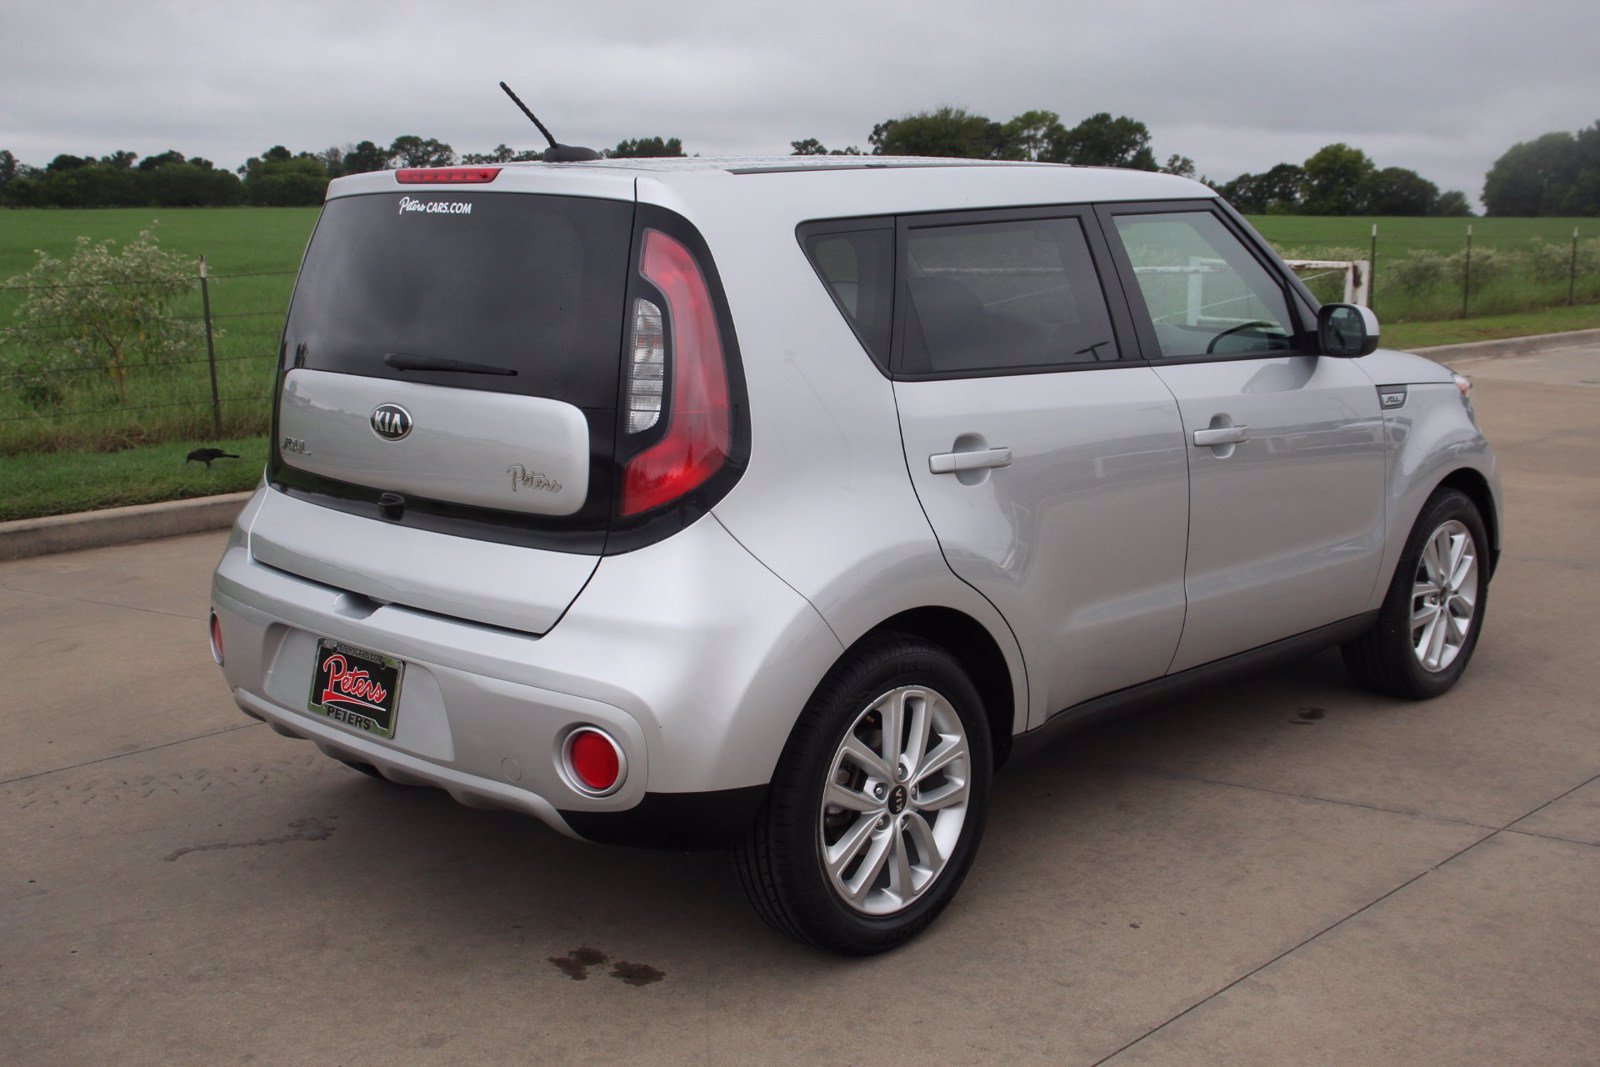 kia soul plus with primo package central carrollton